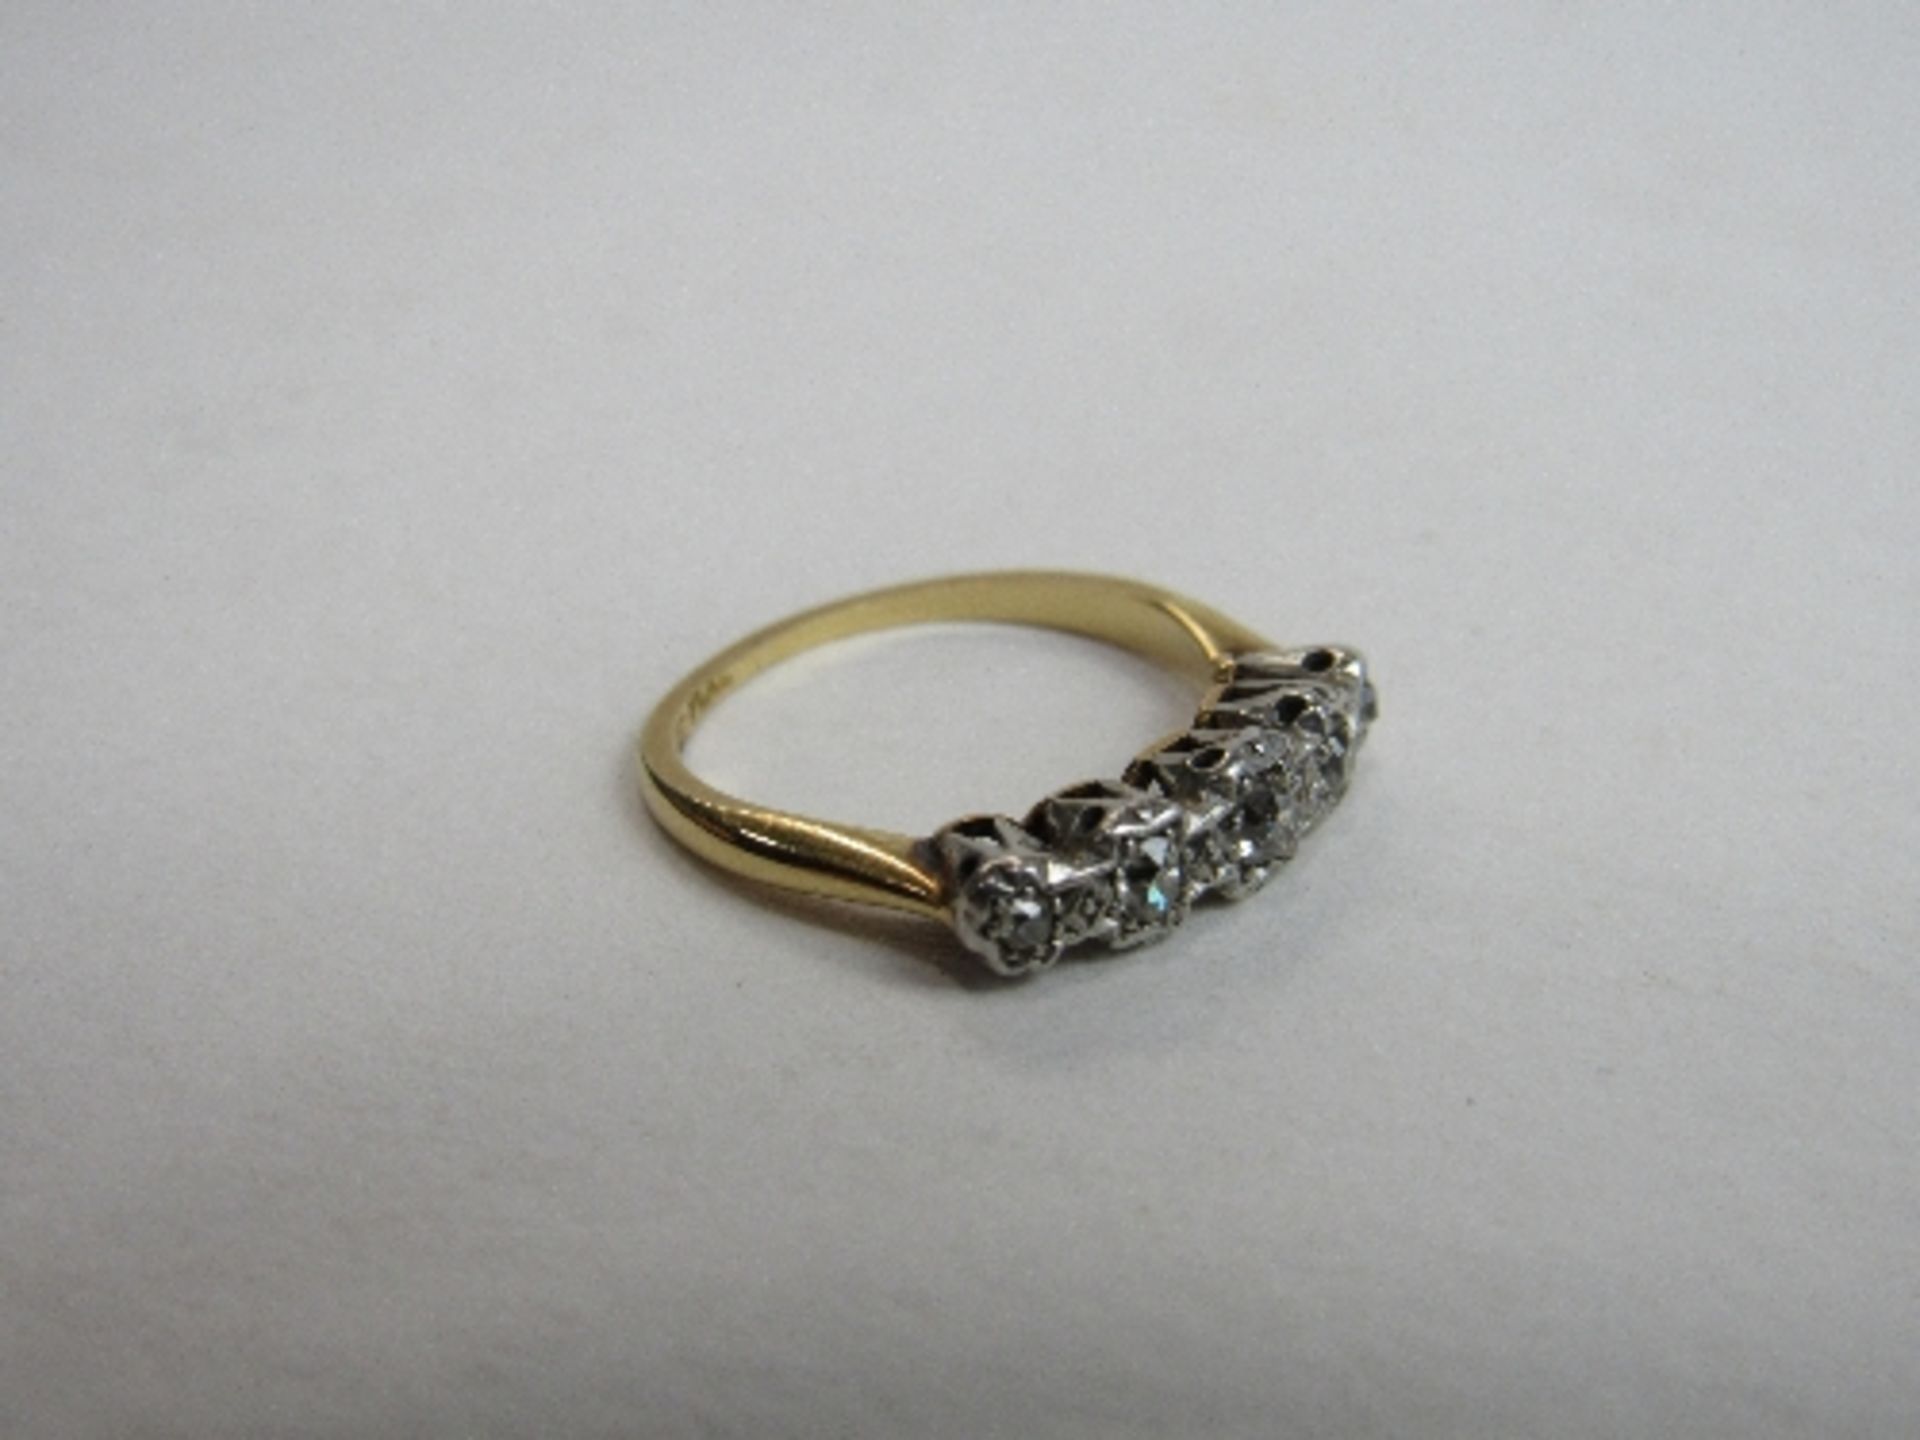 18ct gold & platinum ring set with 5 diamonds, size M, wt 3.2gms. Price guide £100-150.